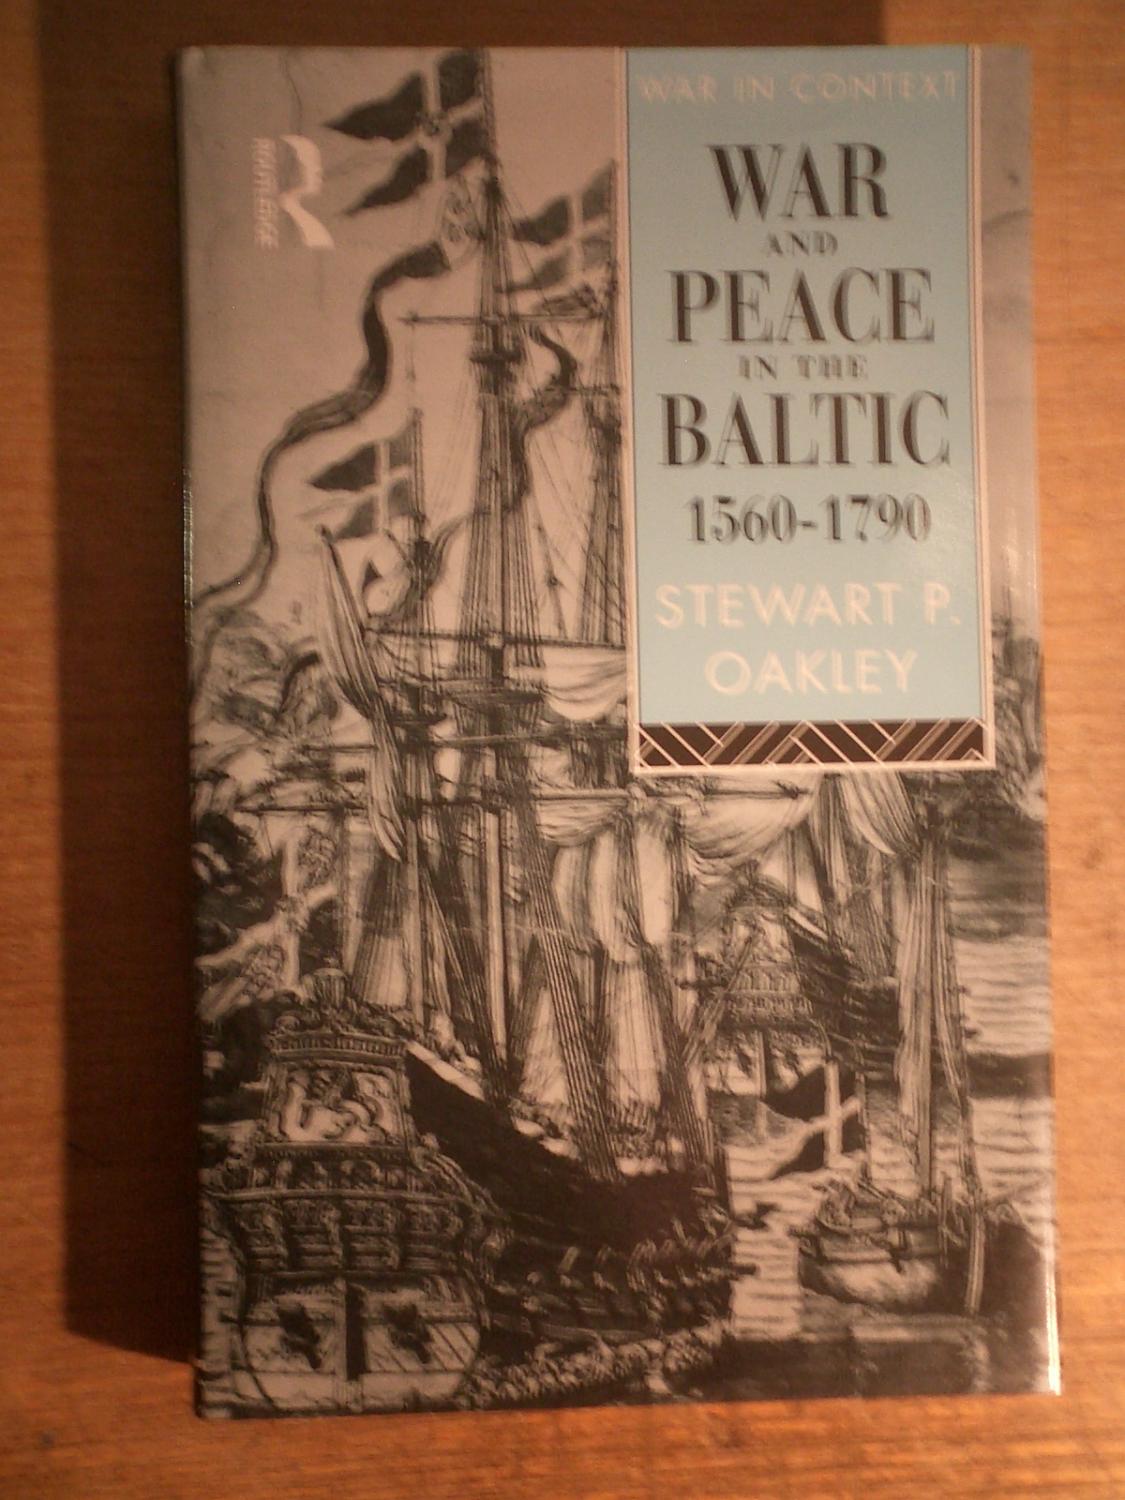 War and Peace in the Baltic 1560-1790 - Oakley, Stewart P.